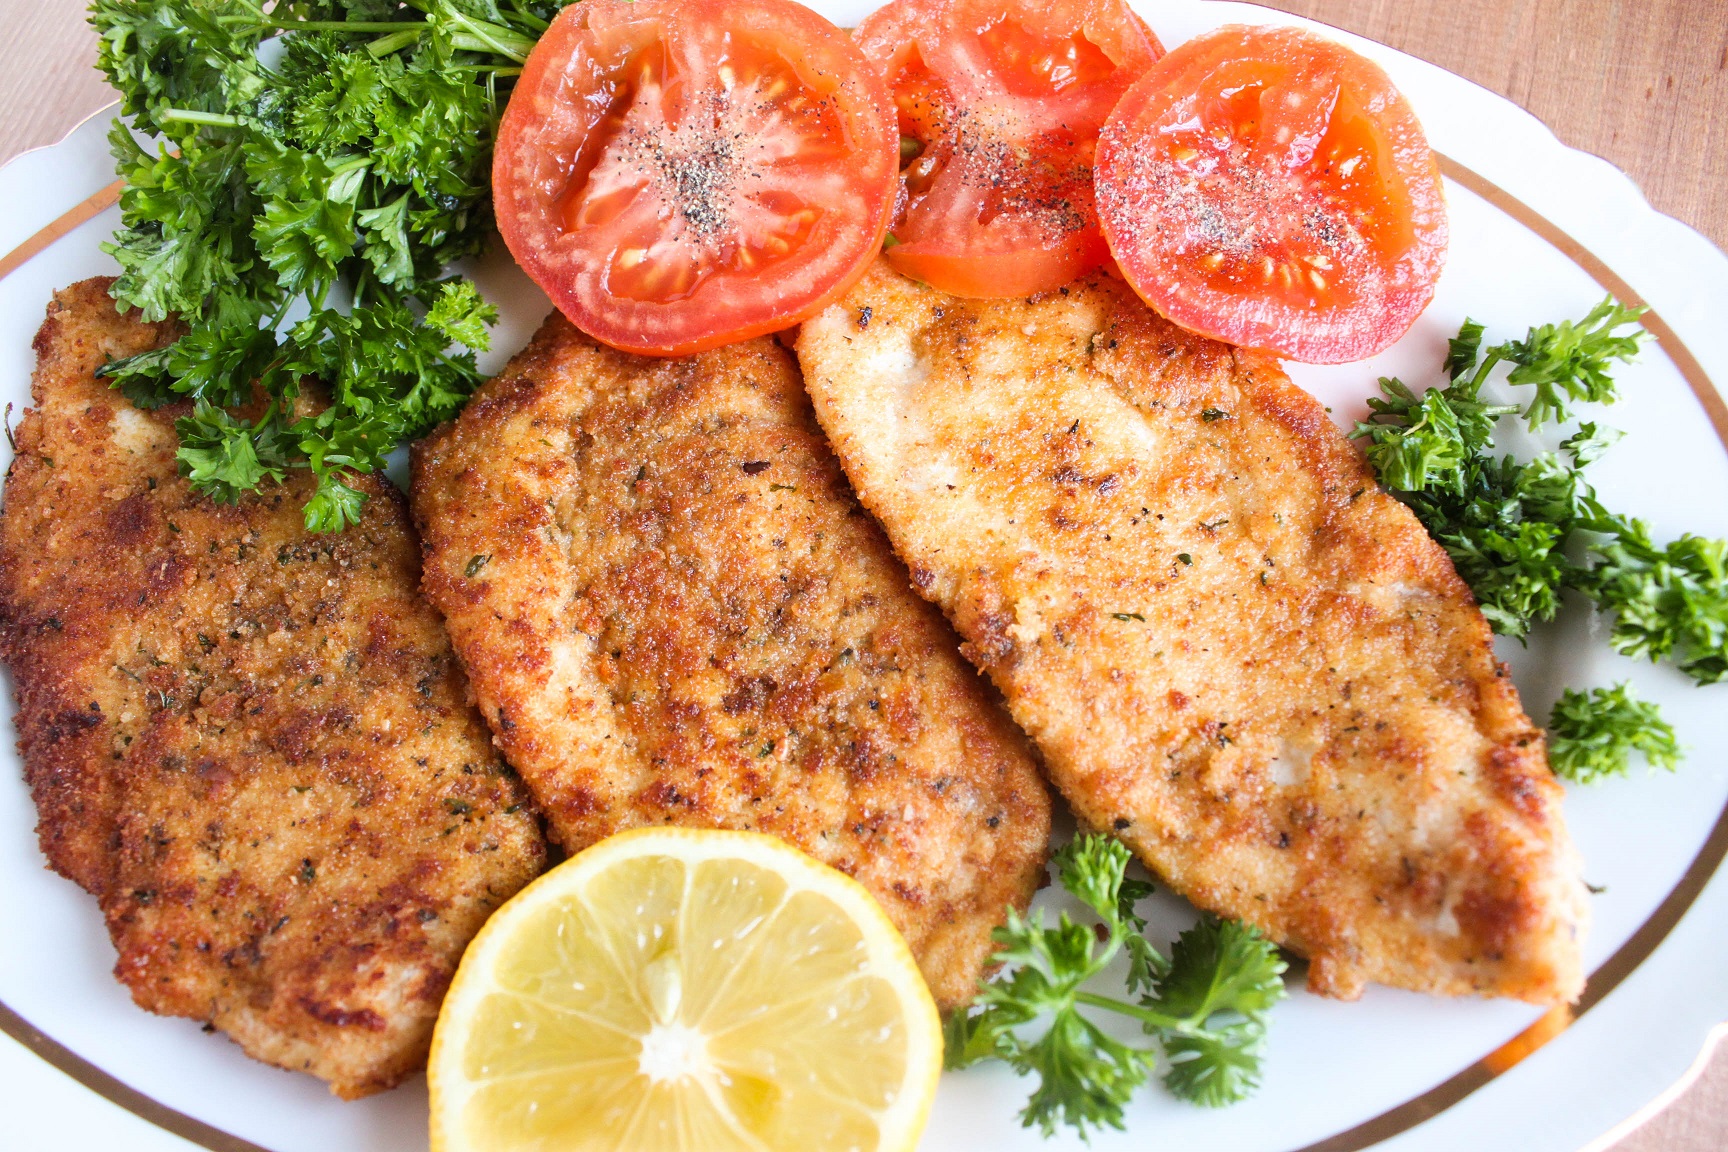 Juicy and  flavorful Chicken chops - tasty and easy to make!